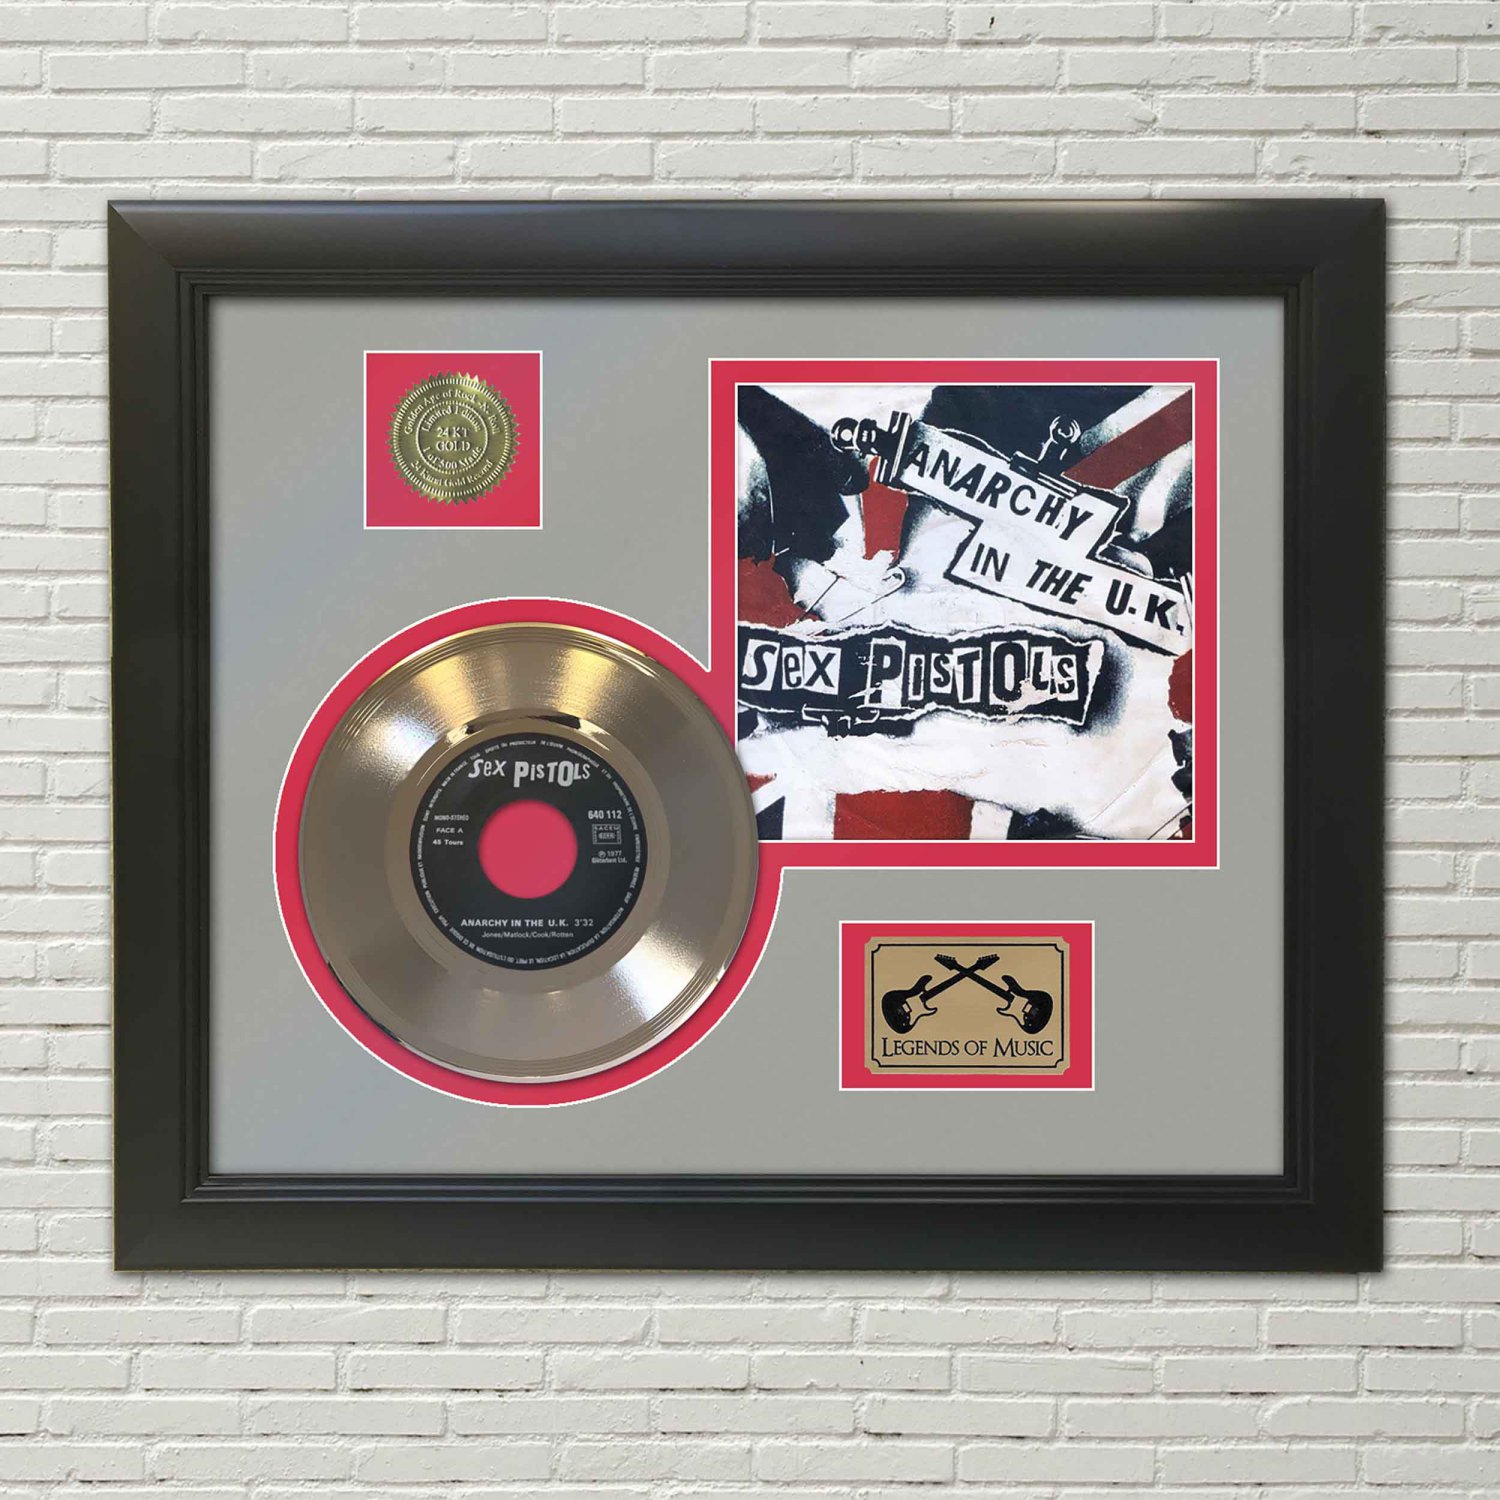 SEX PISTOLS "Anarchy in the U.K."  Framed Picture Sleeve Gold 45 Record Display